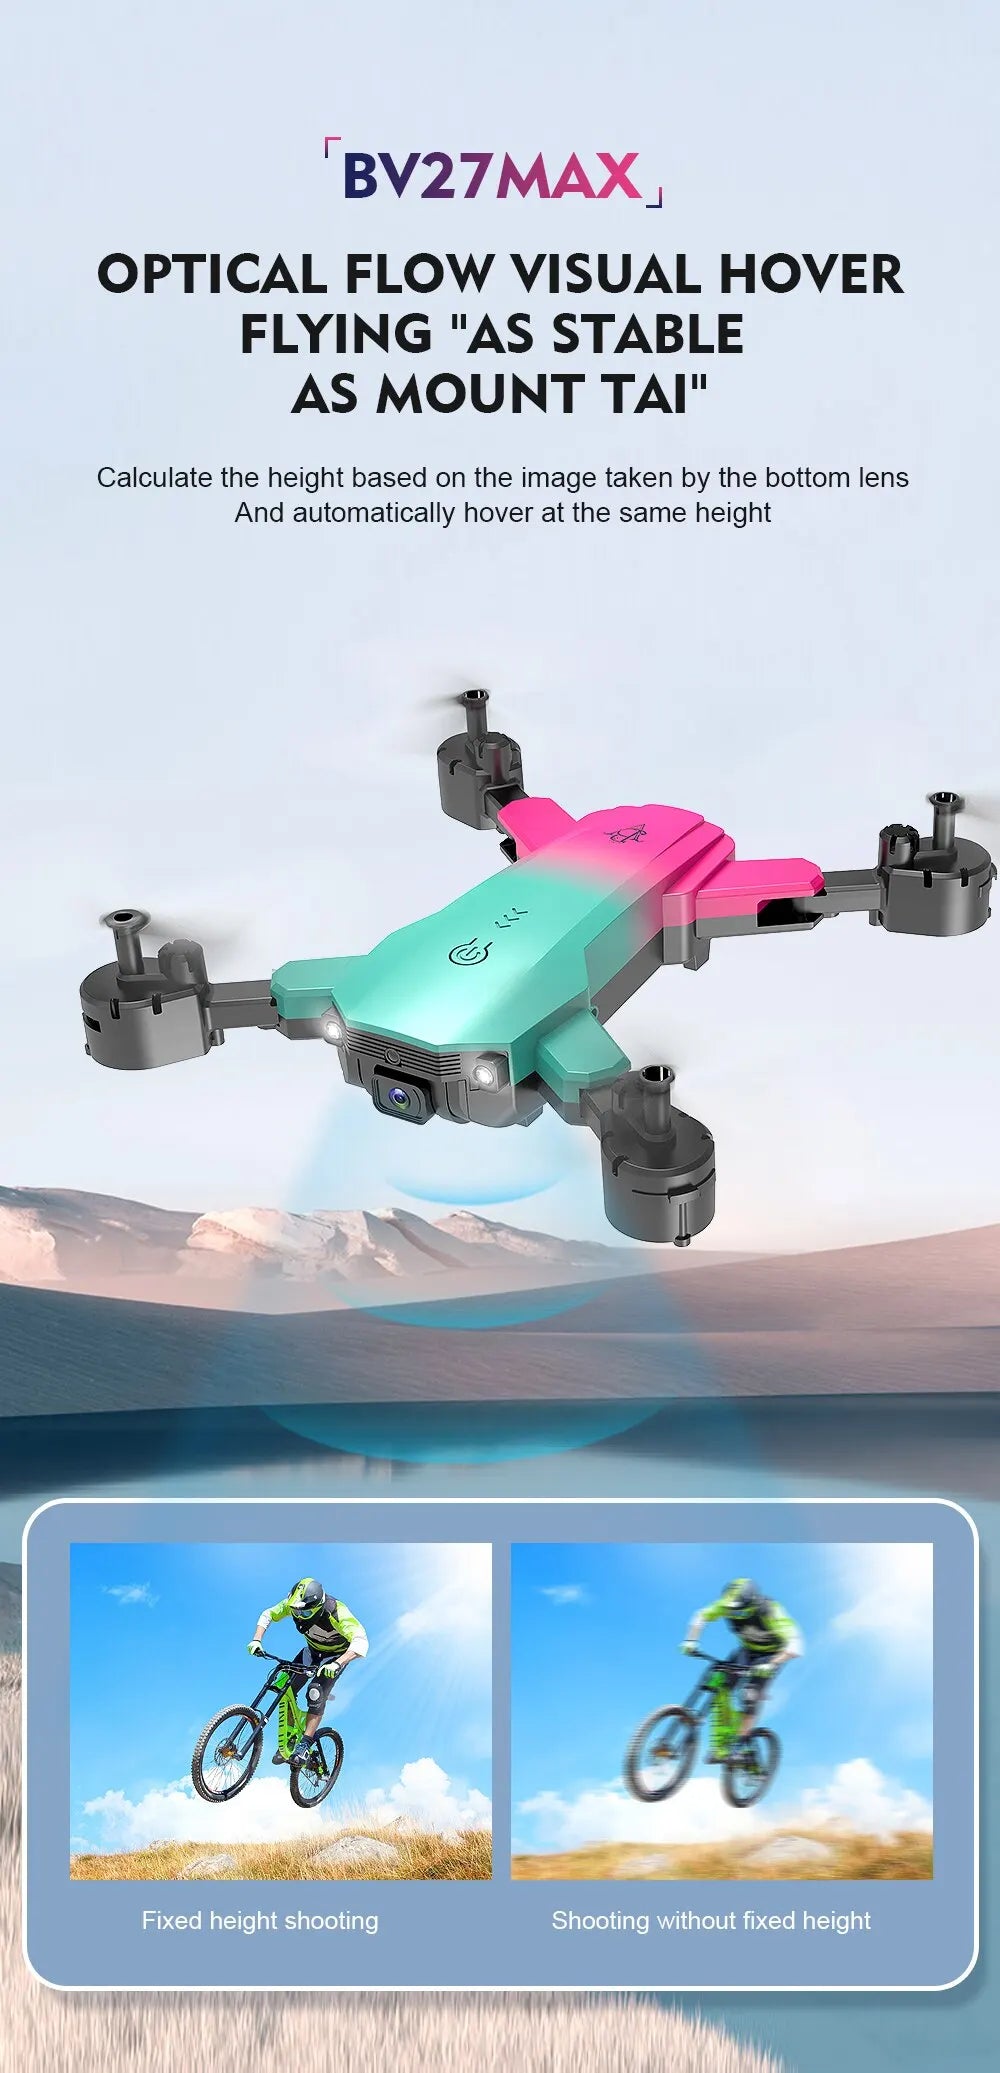 S29 Drone, BVZZMAX OPTICAL FLOW VISUAL HOVER FLYING